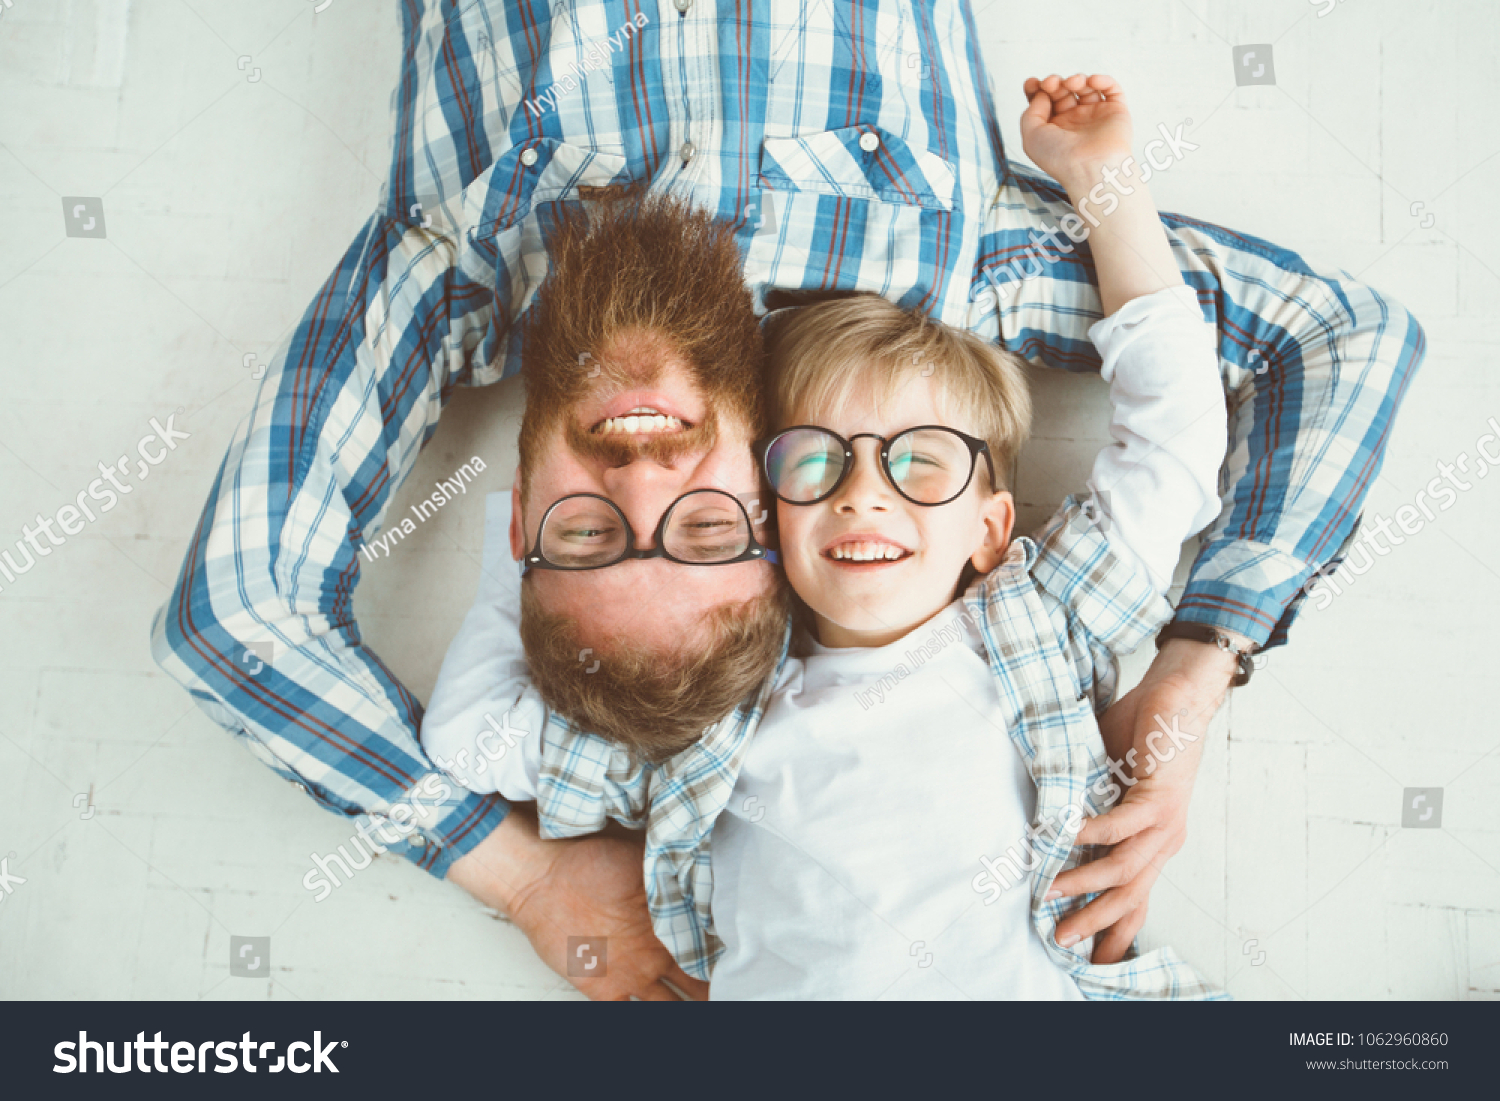 Top view of cute little boy and his handsome young beard dad, both in eyeglasses, smiling while lying with hands behind head on white floor. #1062960860